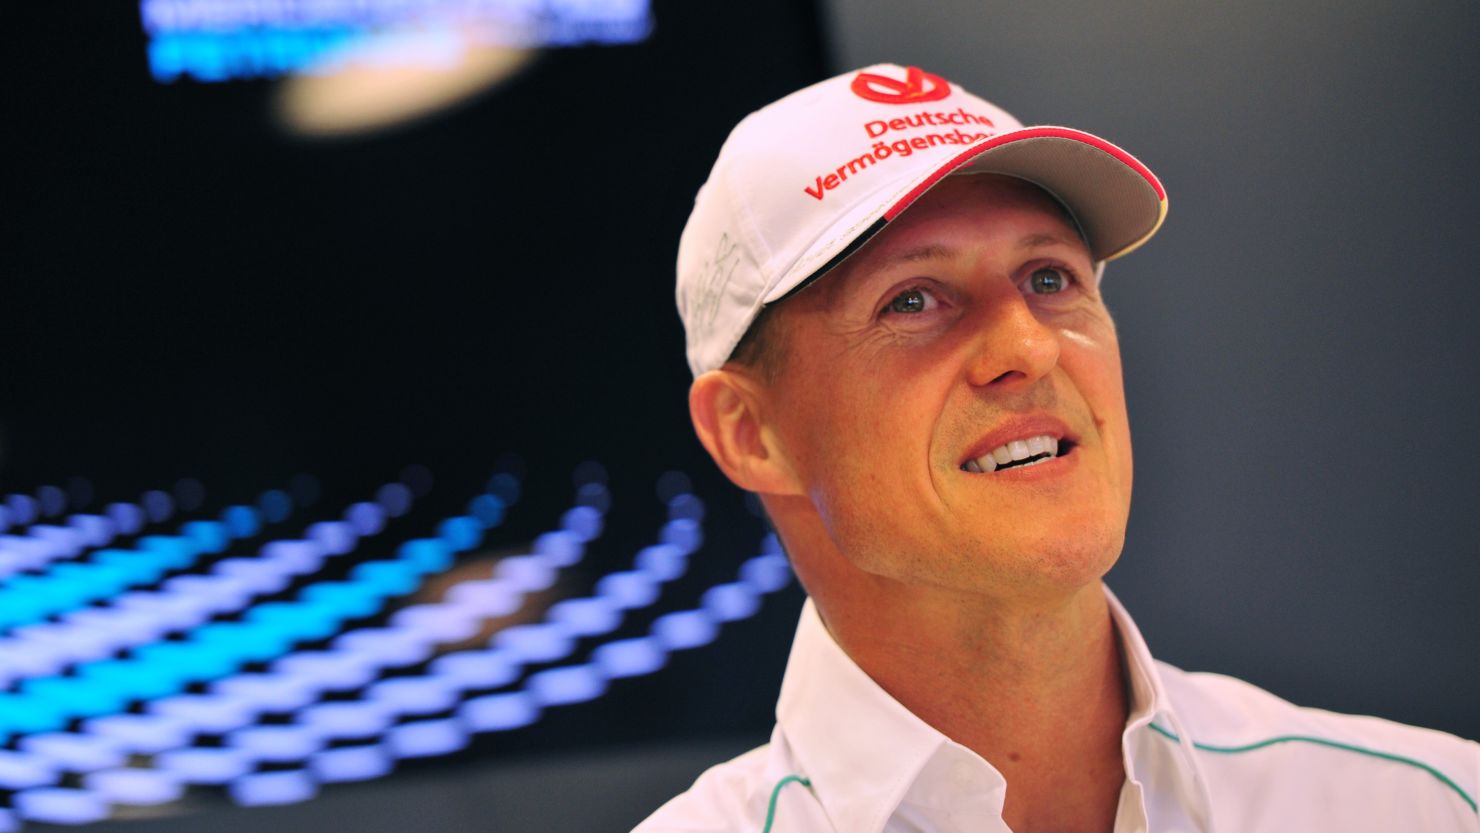 Michael Schumacher's future in Formula One is uncertain after he was reaplced by Lewis Hamilton at Mercedes